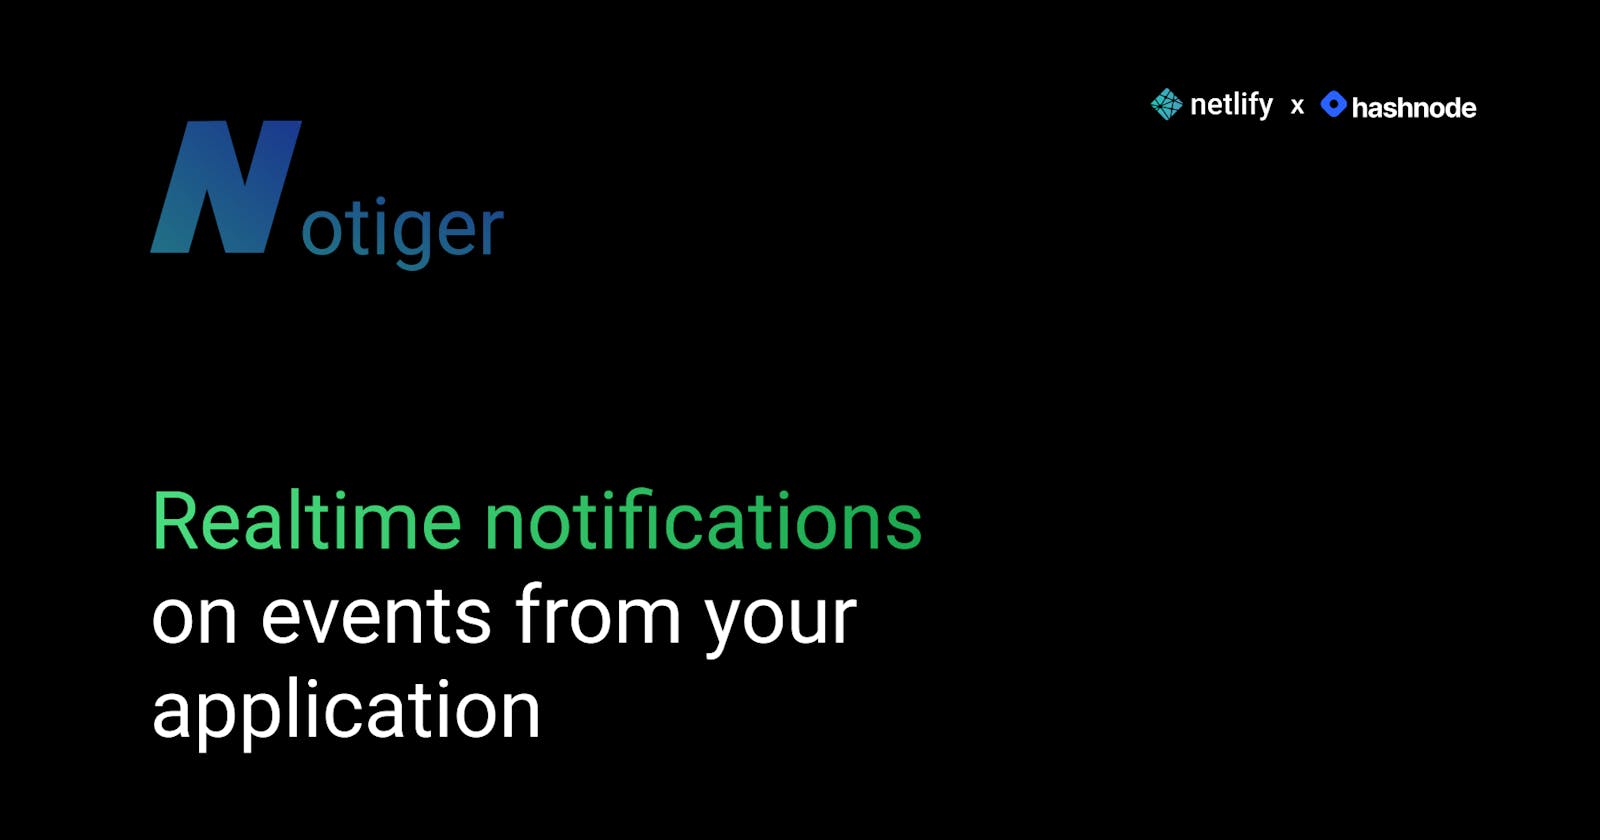 Notiger - Get realtime notifications on events from your application